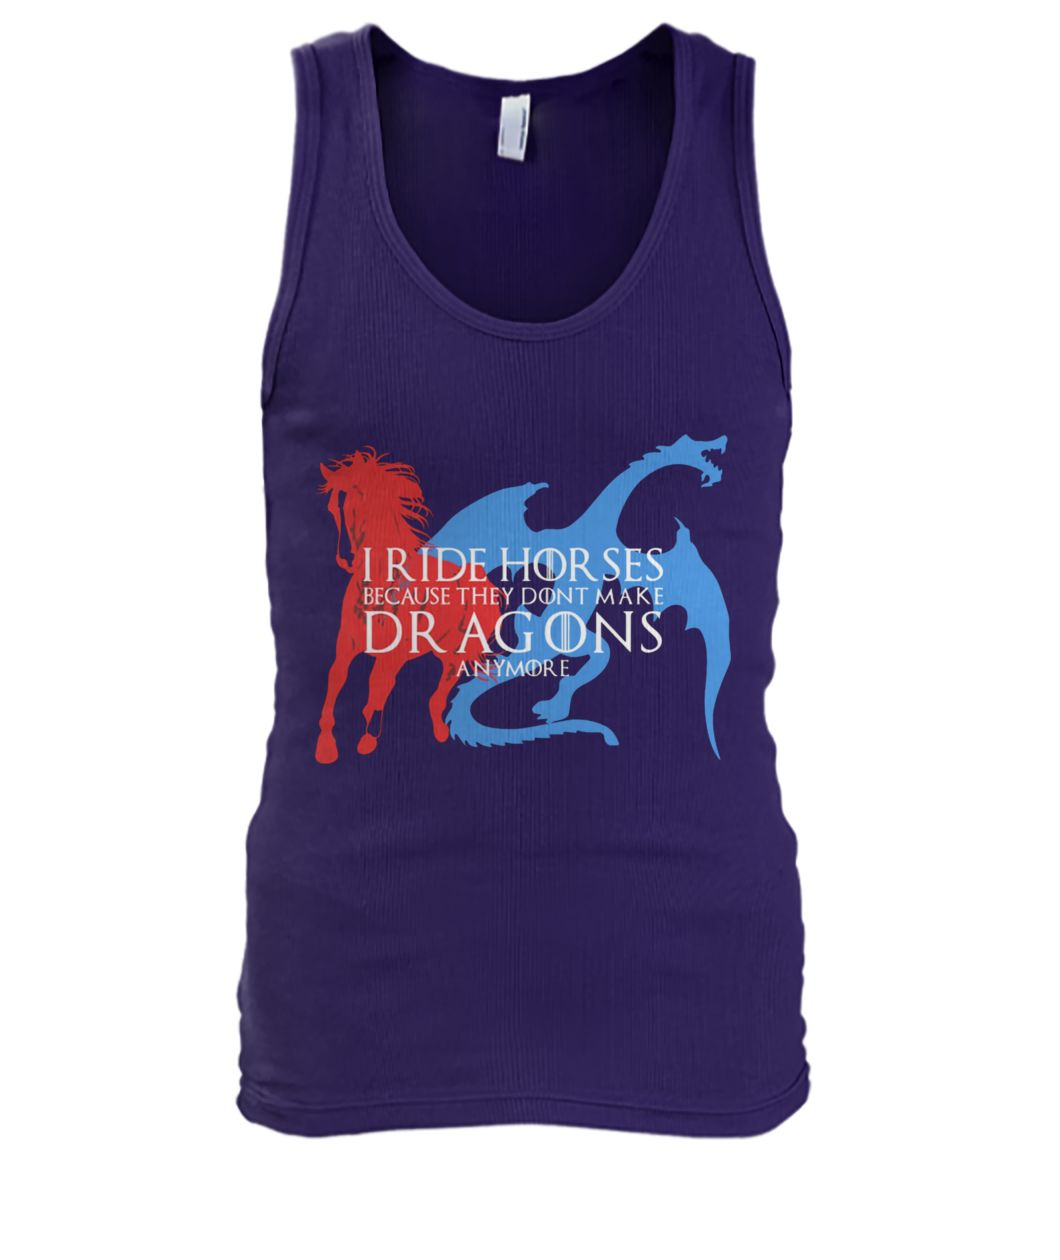 I ride horses because they dont make dragons anymore game of thrones men's tank top